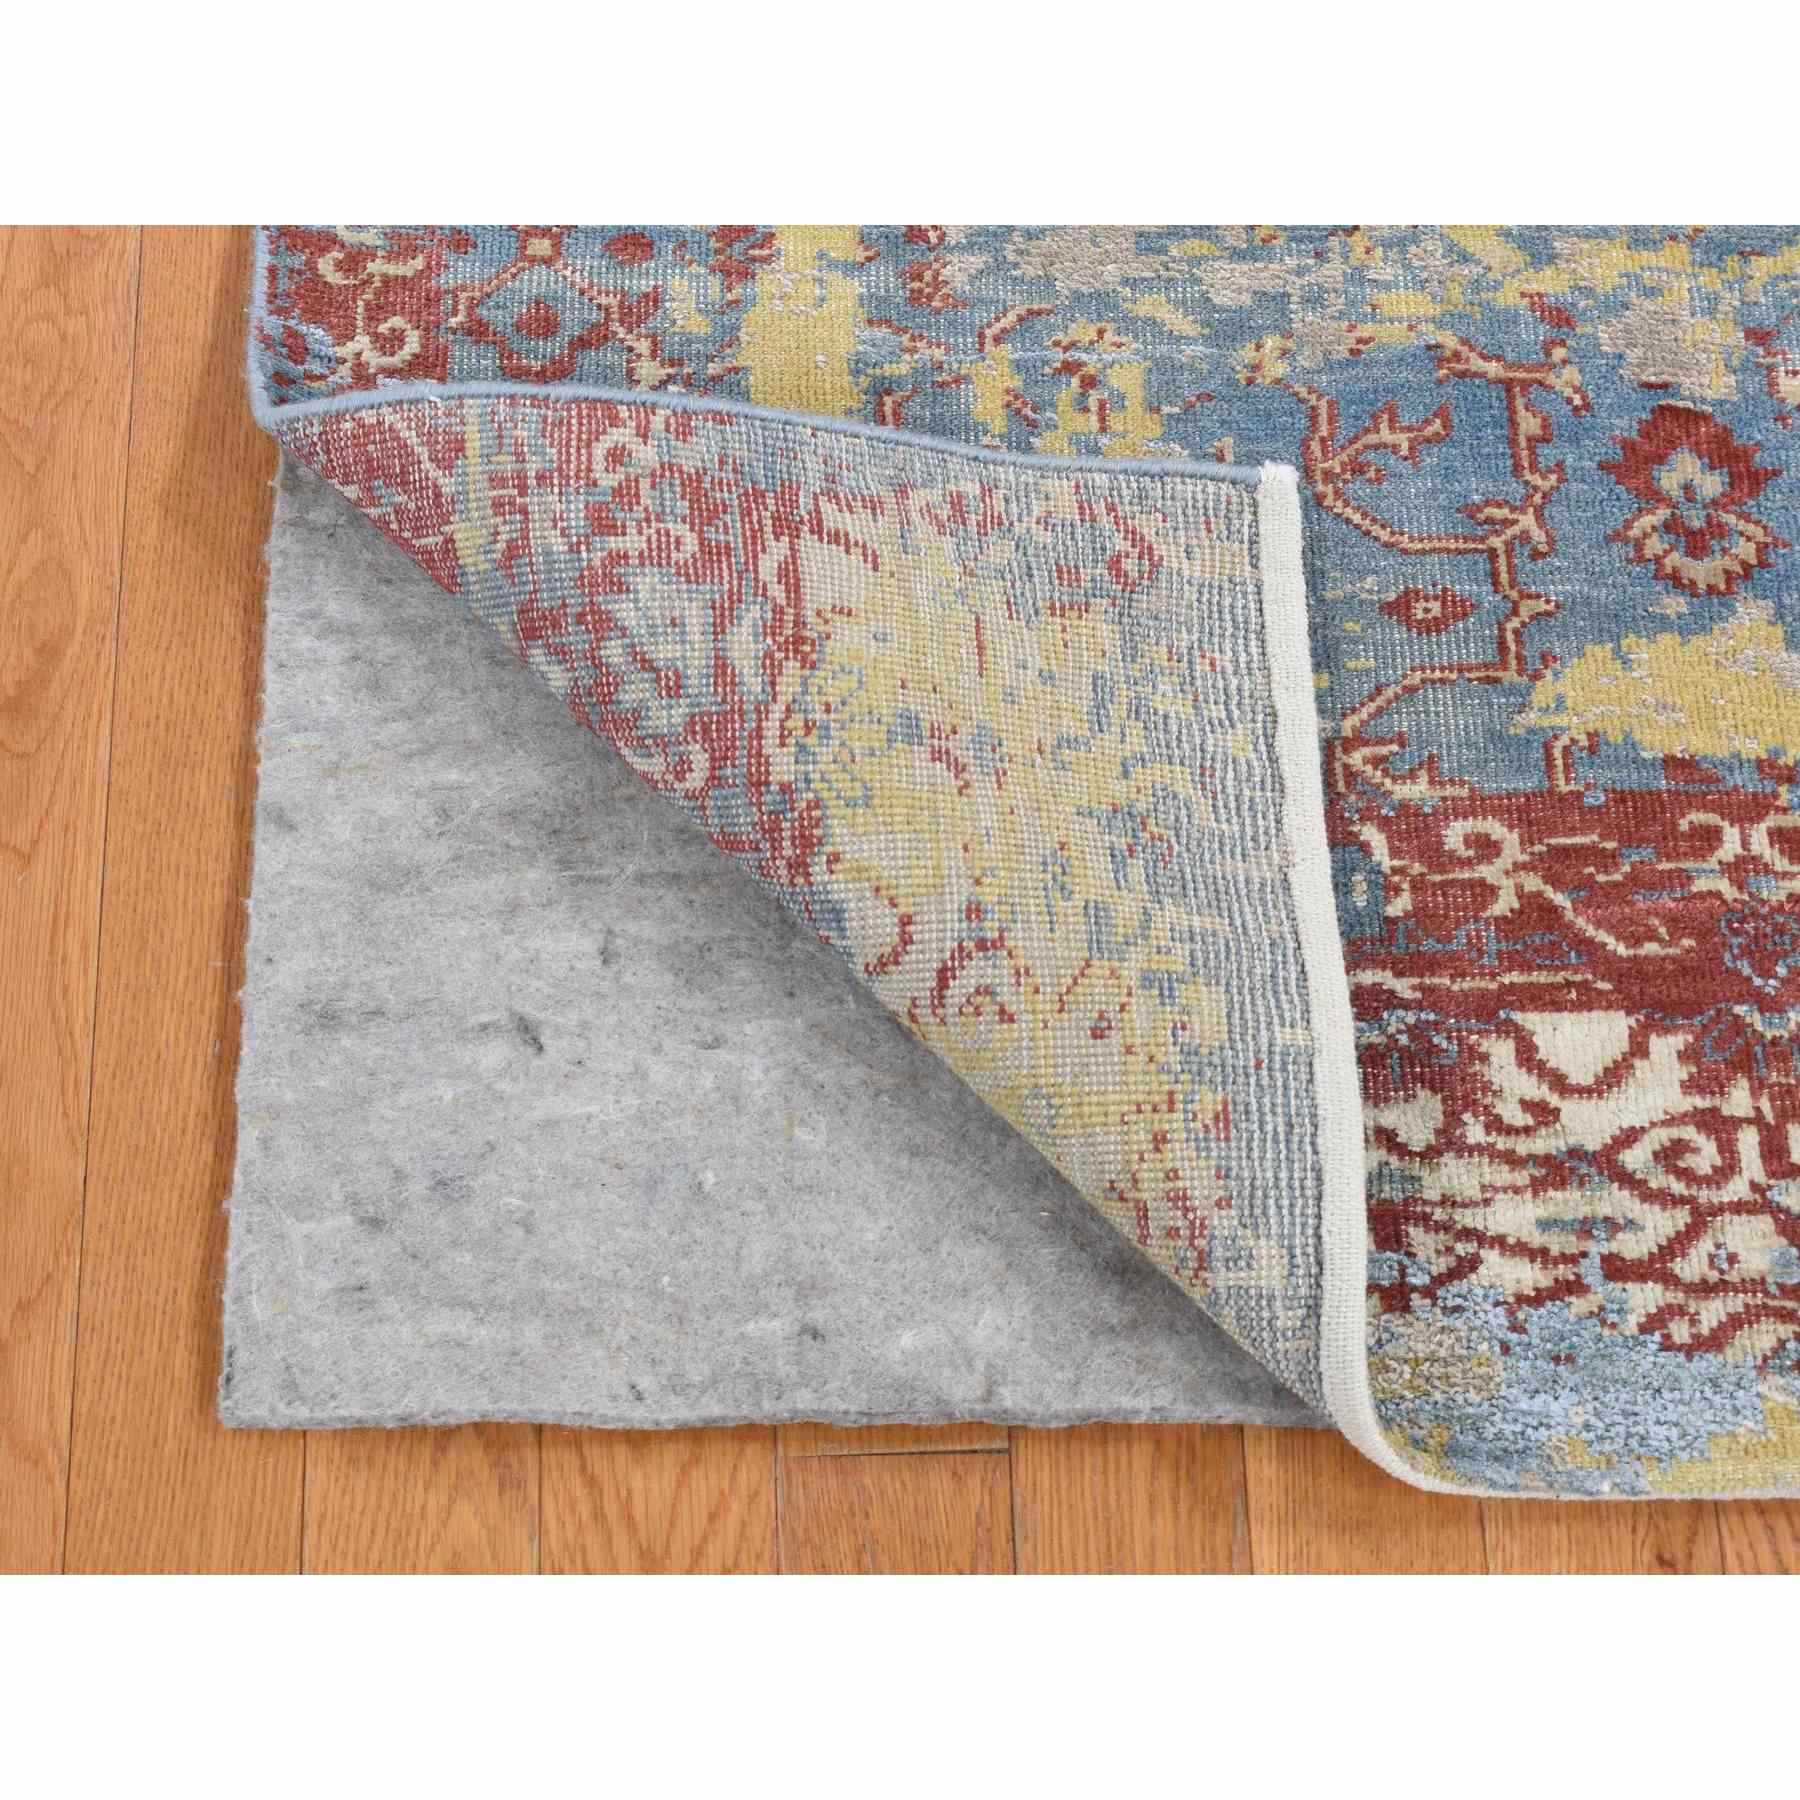 Modern-and-Contemporary-Hand-Knotted-Rug-435985